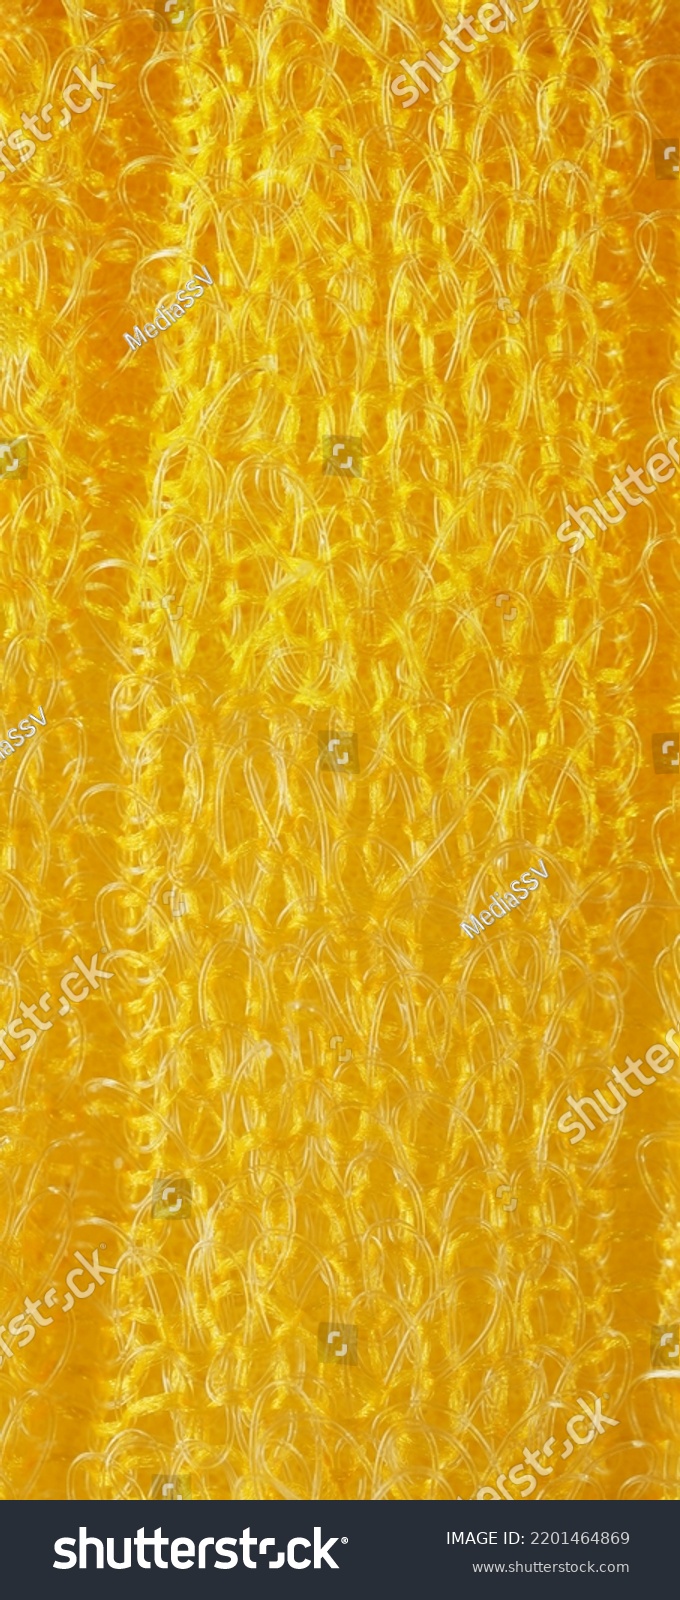 closeup, background, texture, large long vertical banner. heterogeneous surface structure bright saturated yellow sponge for washing dishes, kitchen, bath. full depth of field. high resolution photo #2201464869